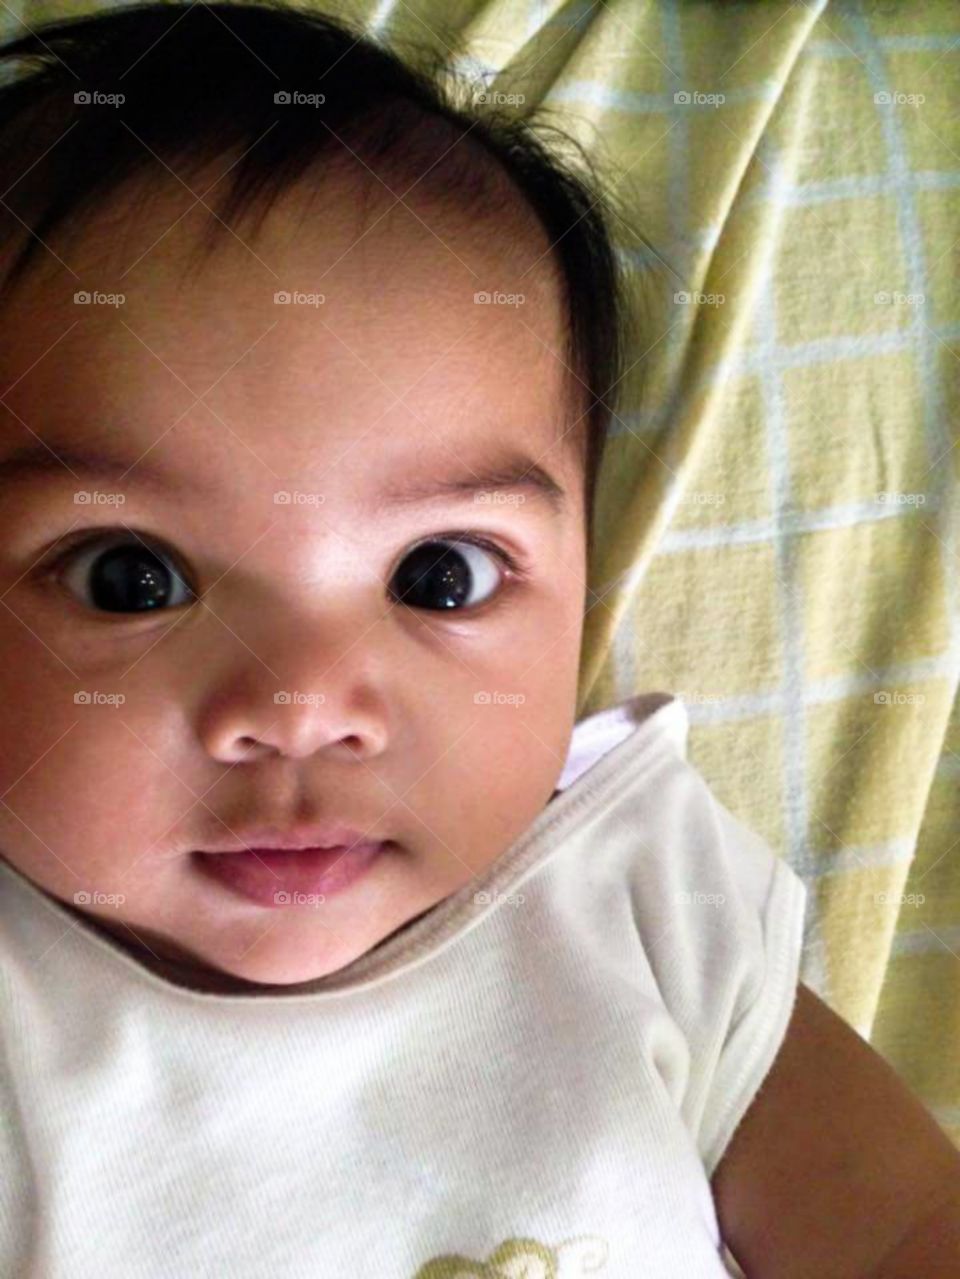 such an innocent face
my niece when she was a baby